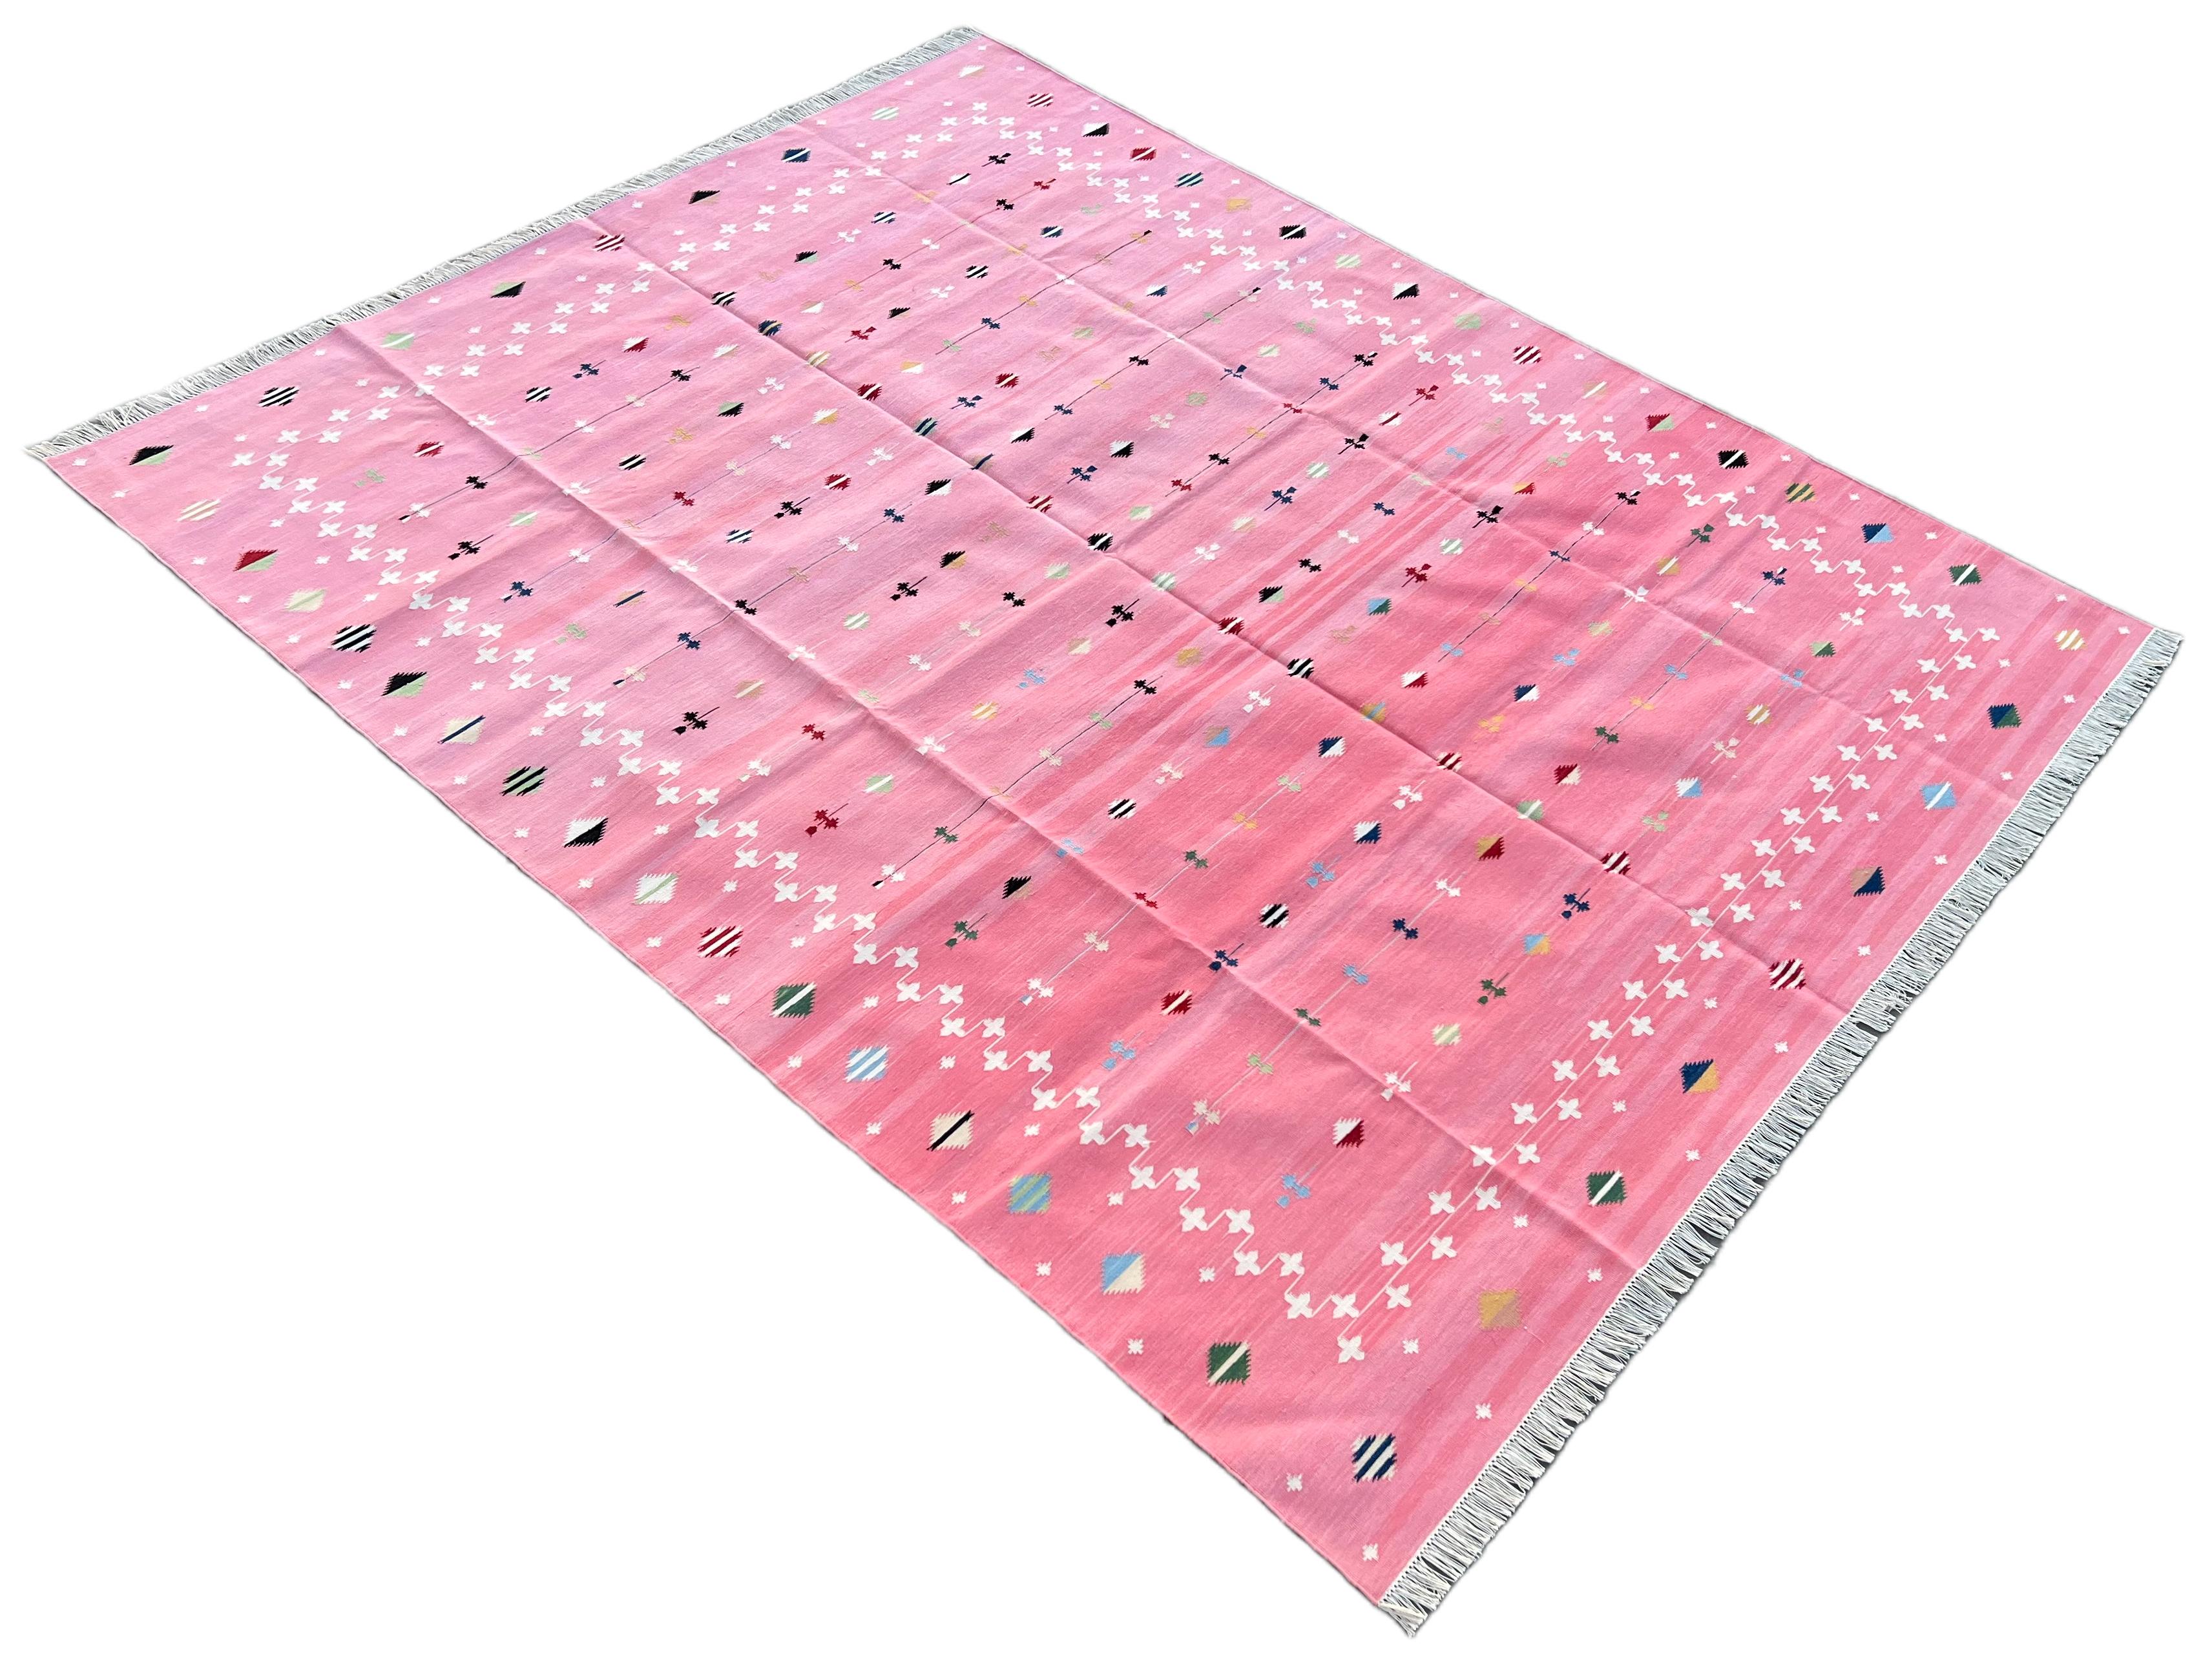 Kilim Handmade Cotton Area Flat Weave Rug, 8x10 Pink And White Shooting Star Dhurrie For Sale